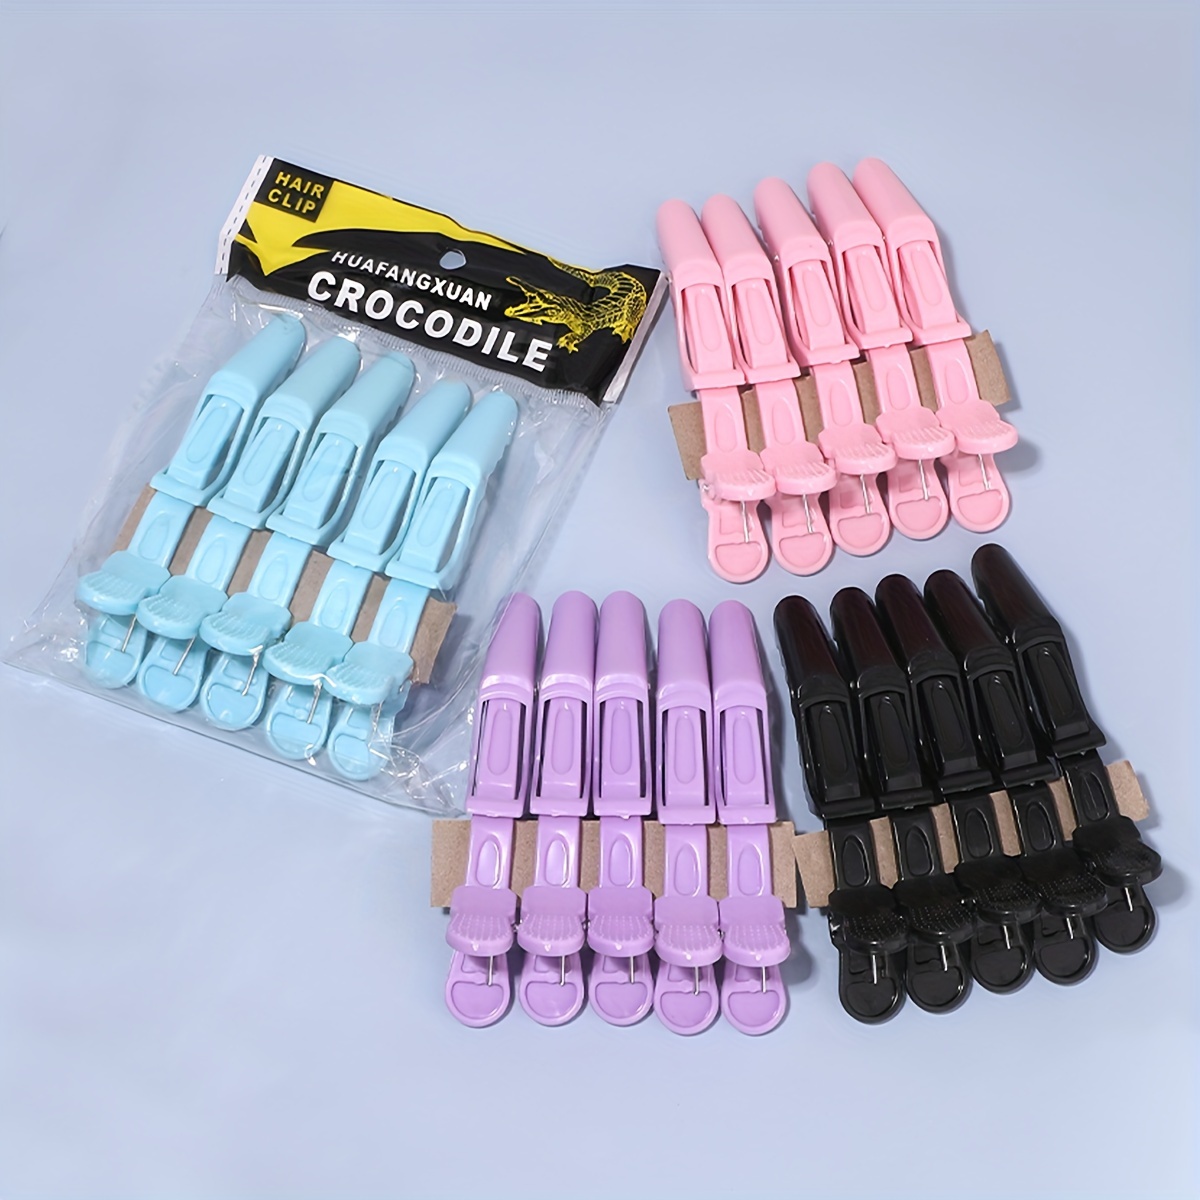 

Hair Sectioning Clips, Crocodile Hair Clips For Styling And Salon Use, Durable Non-slip Grip, Multi-color Plastic Alligator Clips For Hair Dye, Perm, And Sectioning - (5 Clips Per Pack)